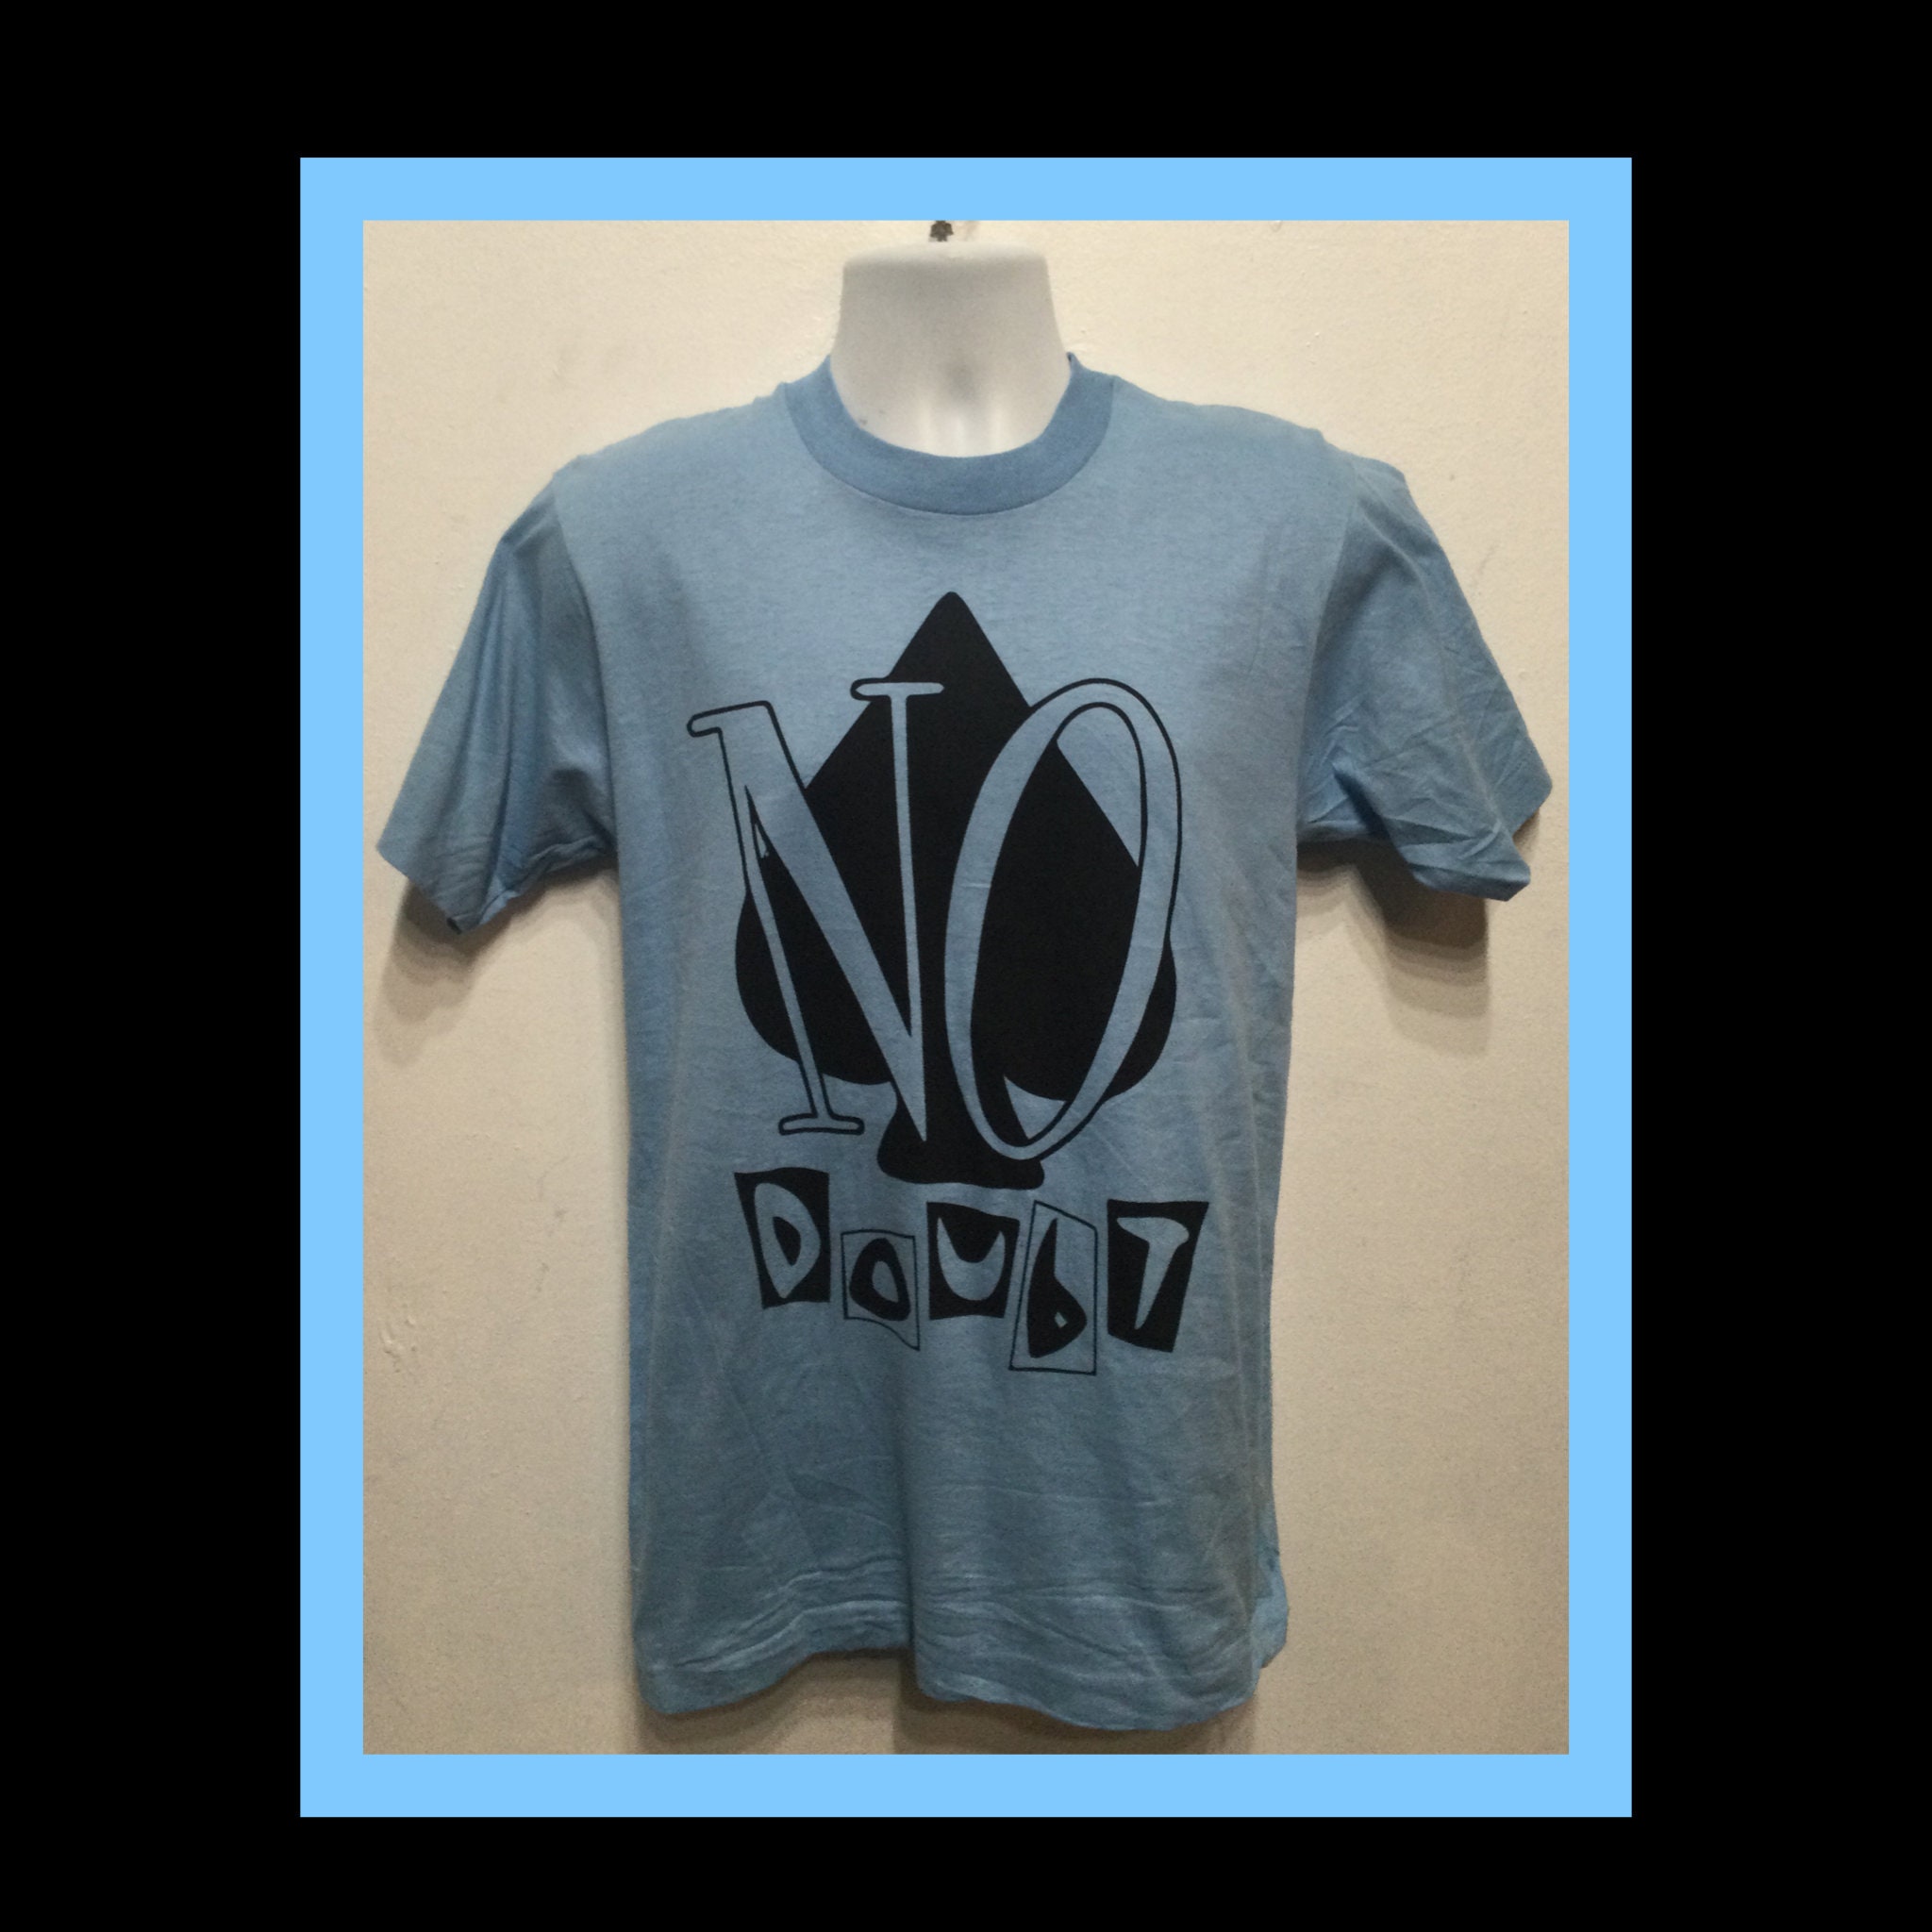 Discover Vintage printed rock T-shirt -" No Doubt "